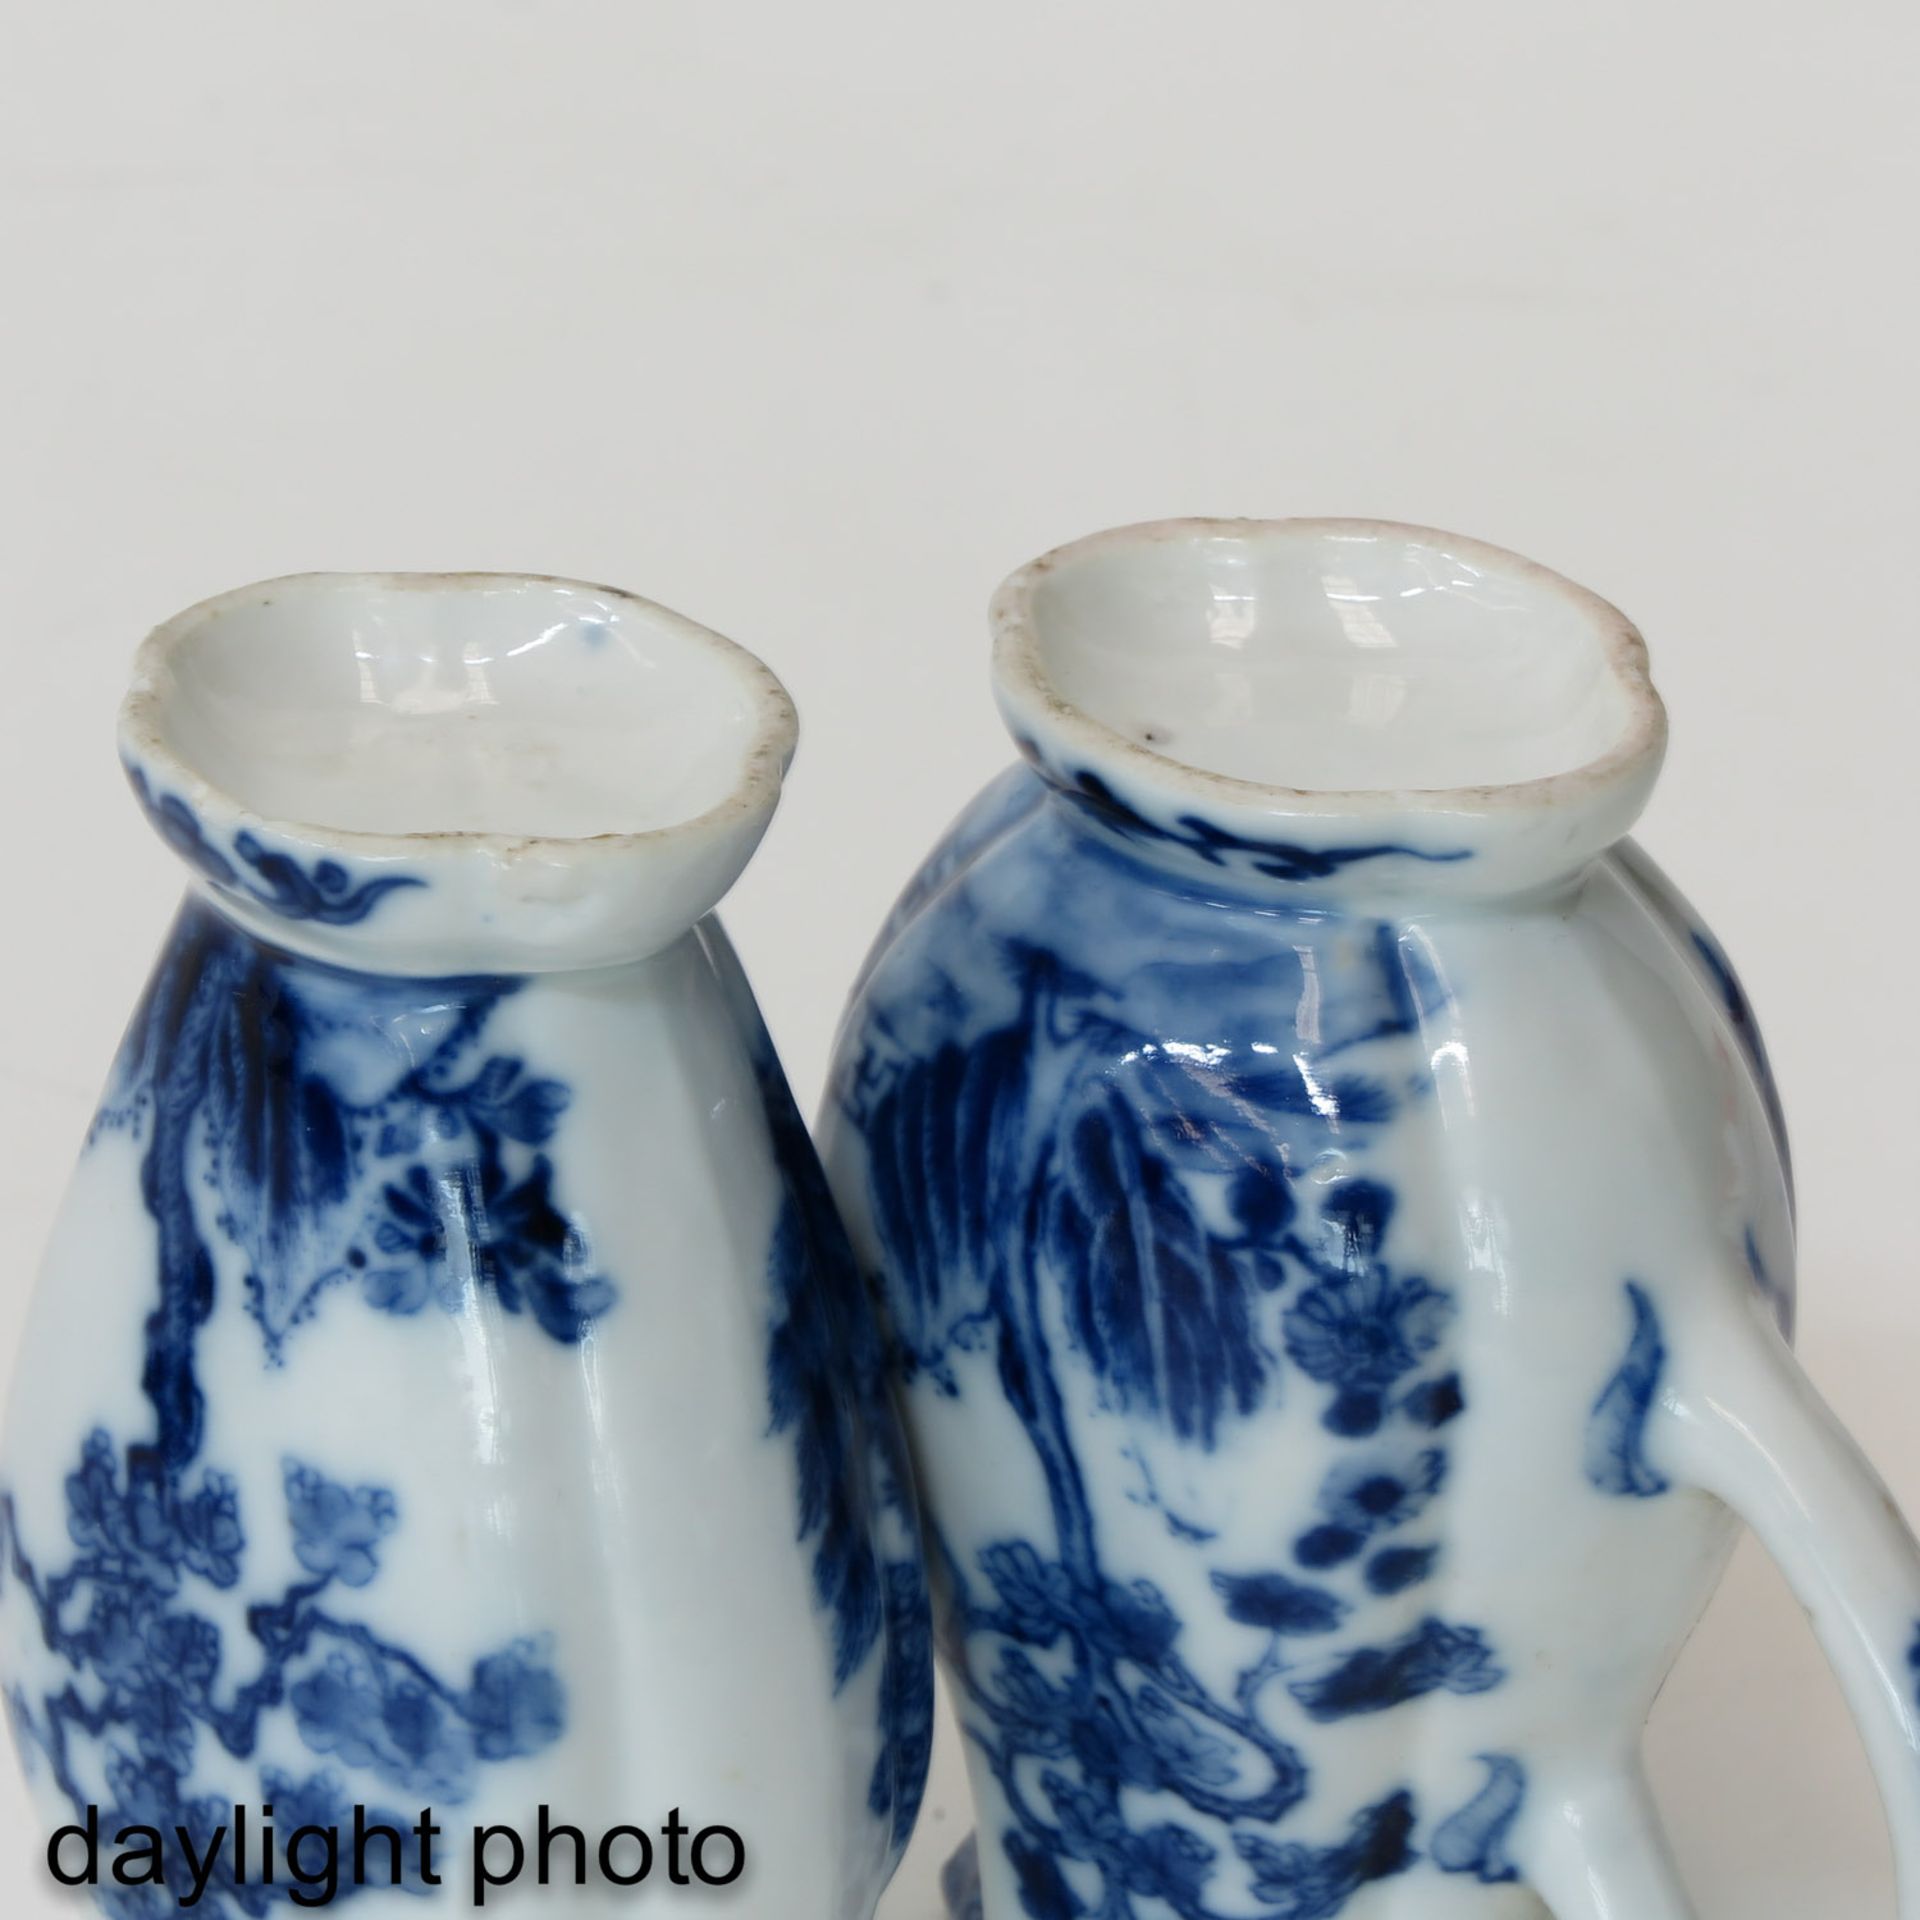 A Vase with Cover and Creamer - Image 8 of 9